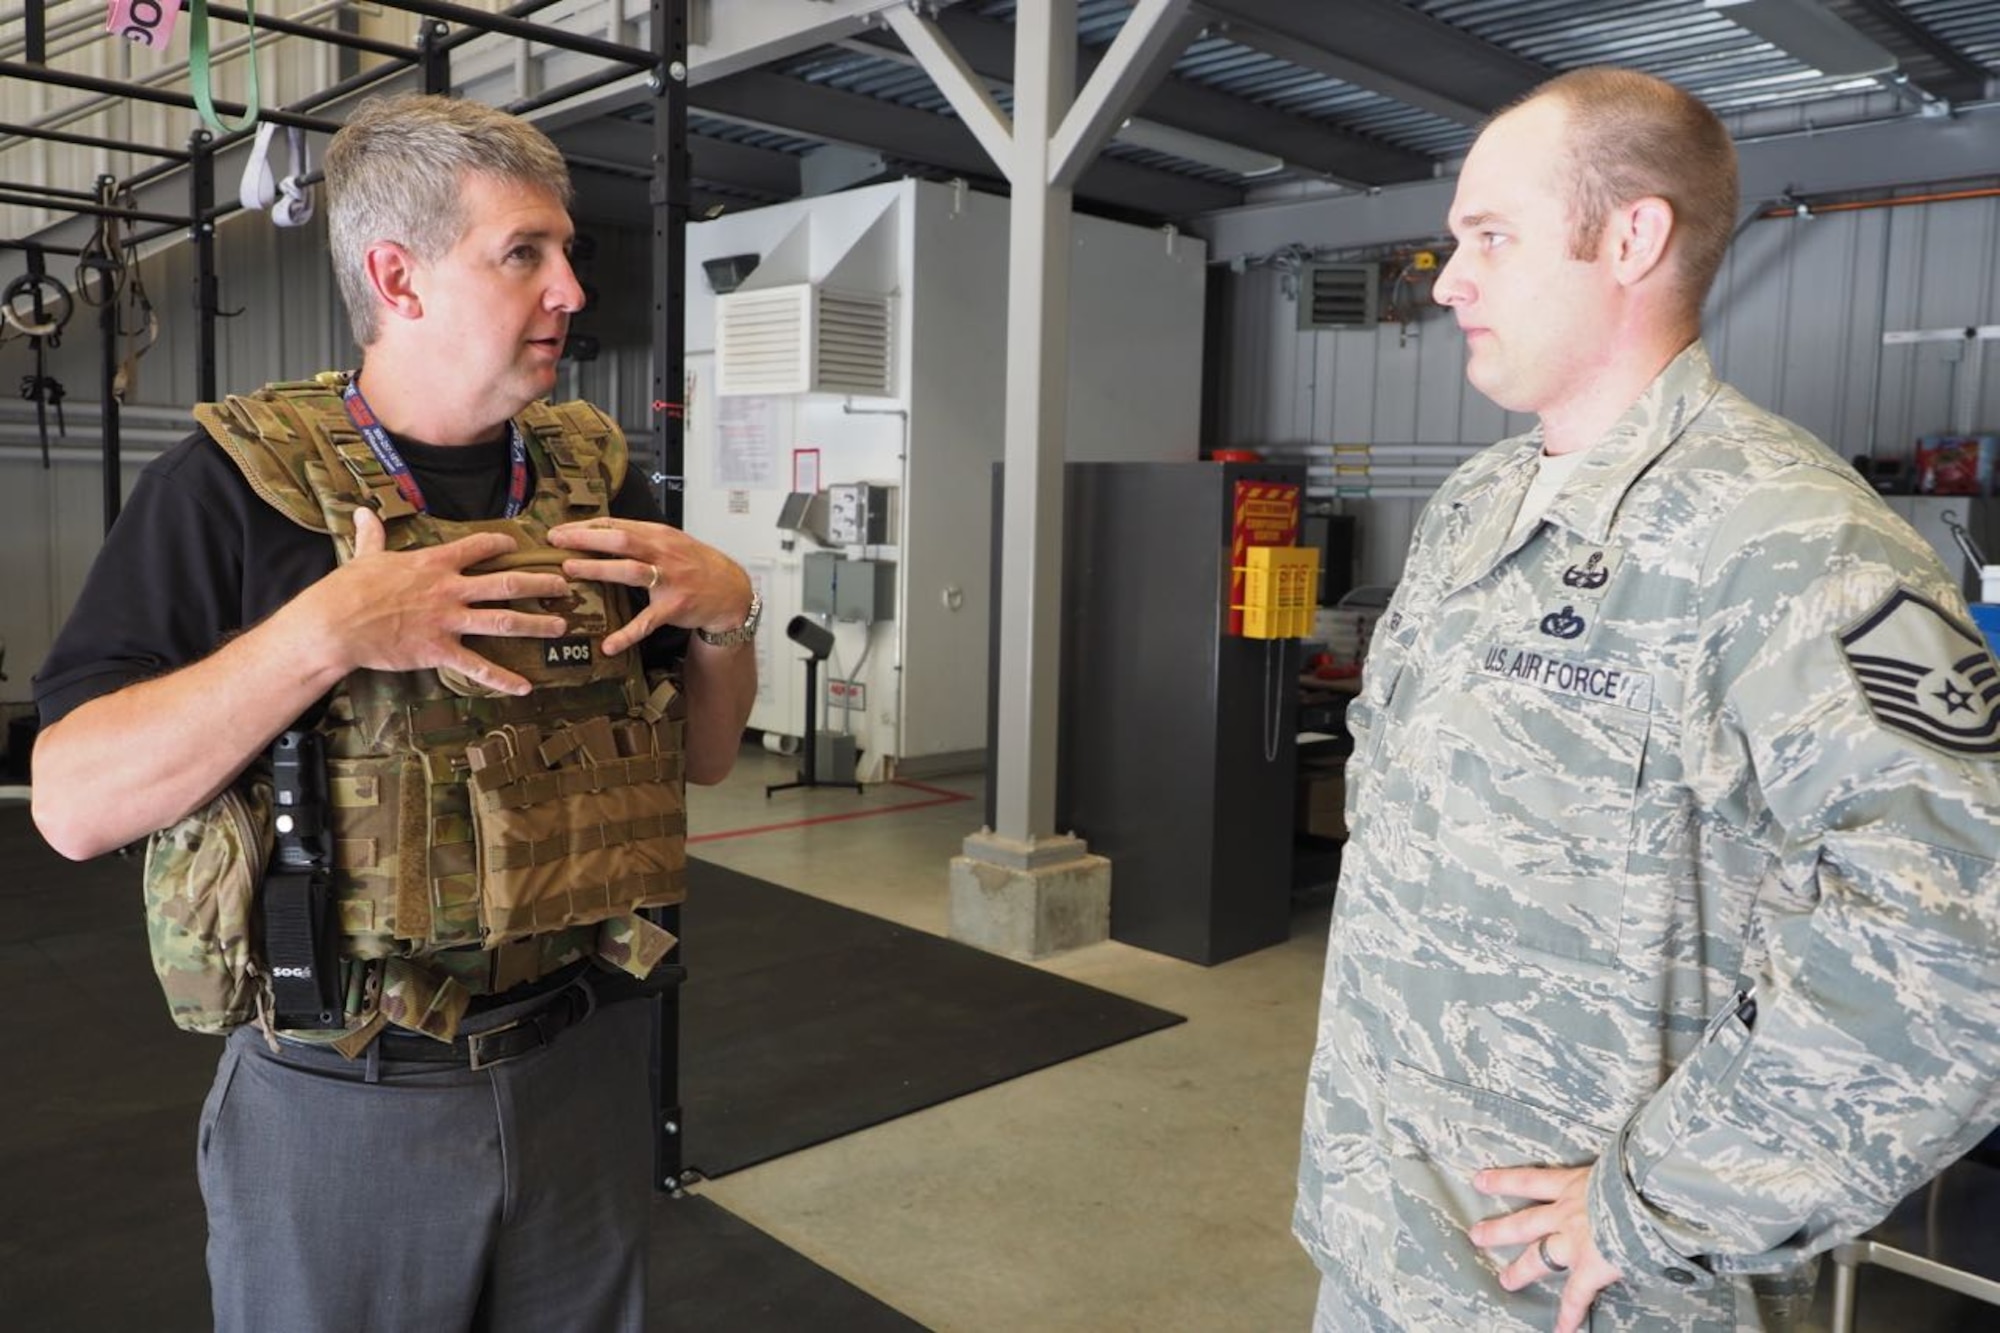 Master Sgt. Steve Hager, 934th Explosive Ordnance Disposal, talks about protective gear to Honorary Commander John Stenz. (Air Force Photo/Paul Zadach)